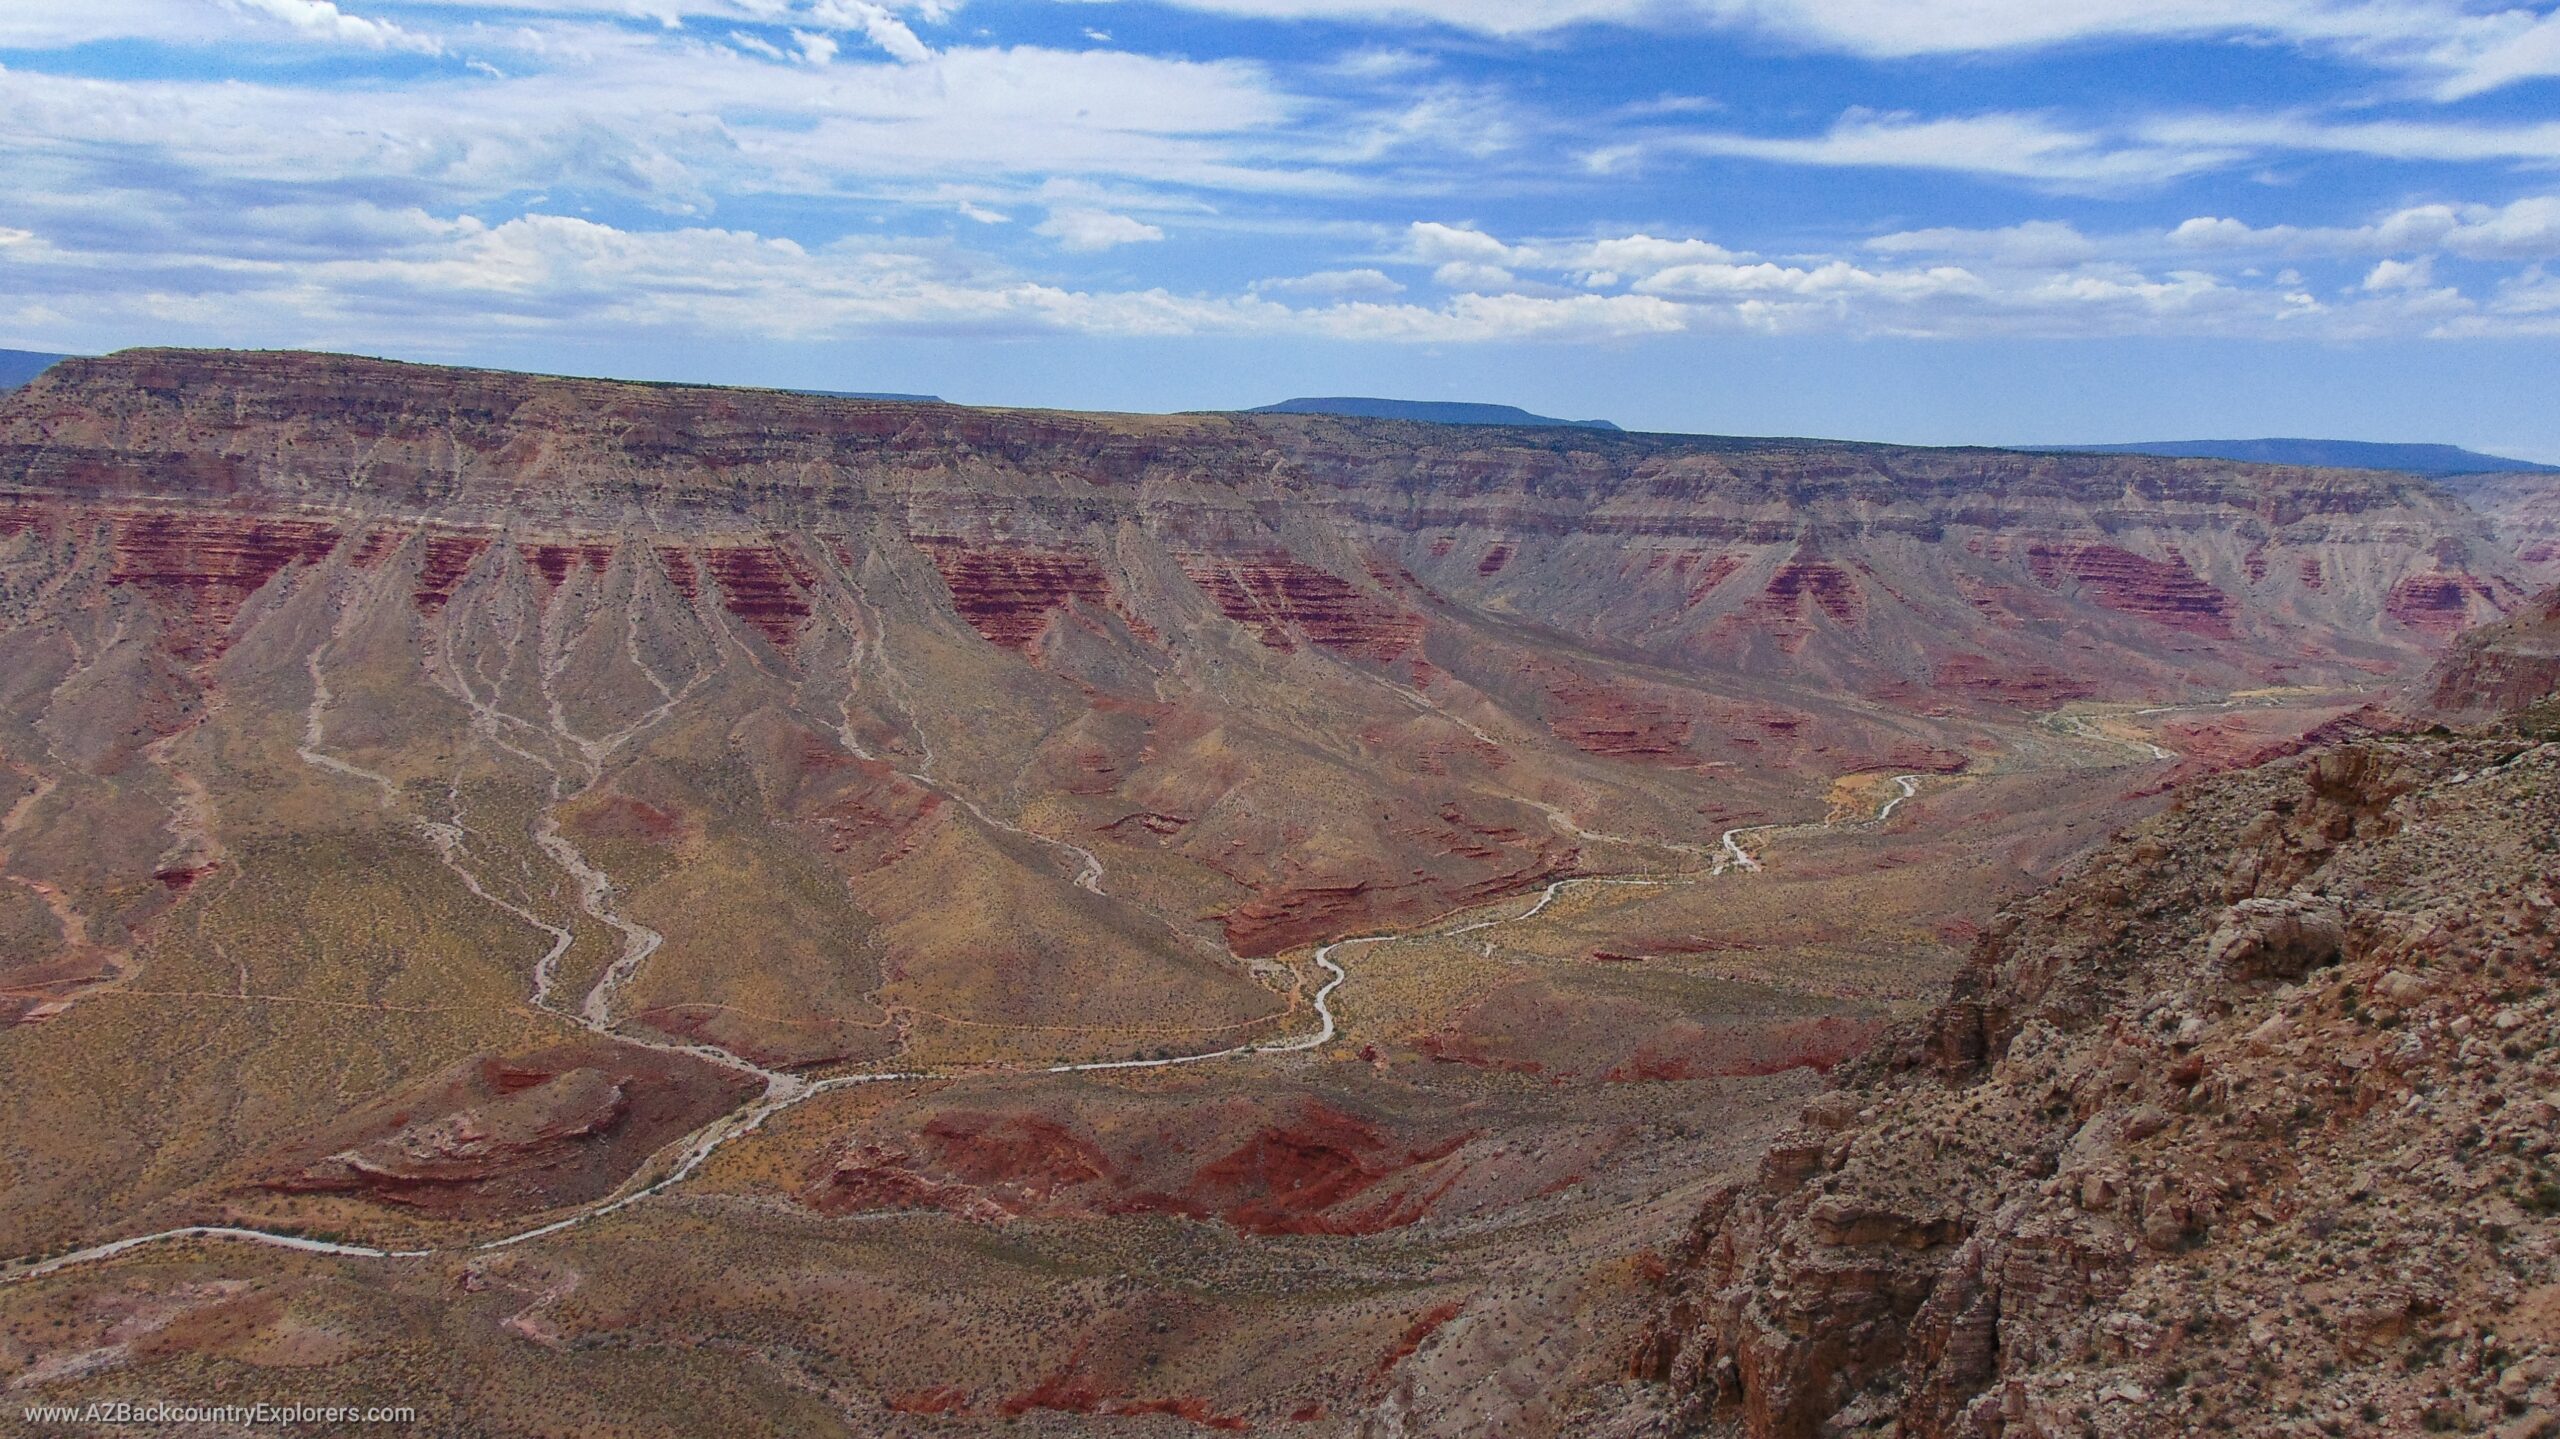 Parashant expedition two | A 4×4 journey to the heart of the Grand Canyon.